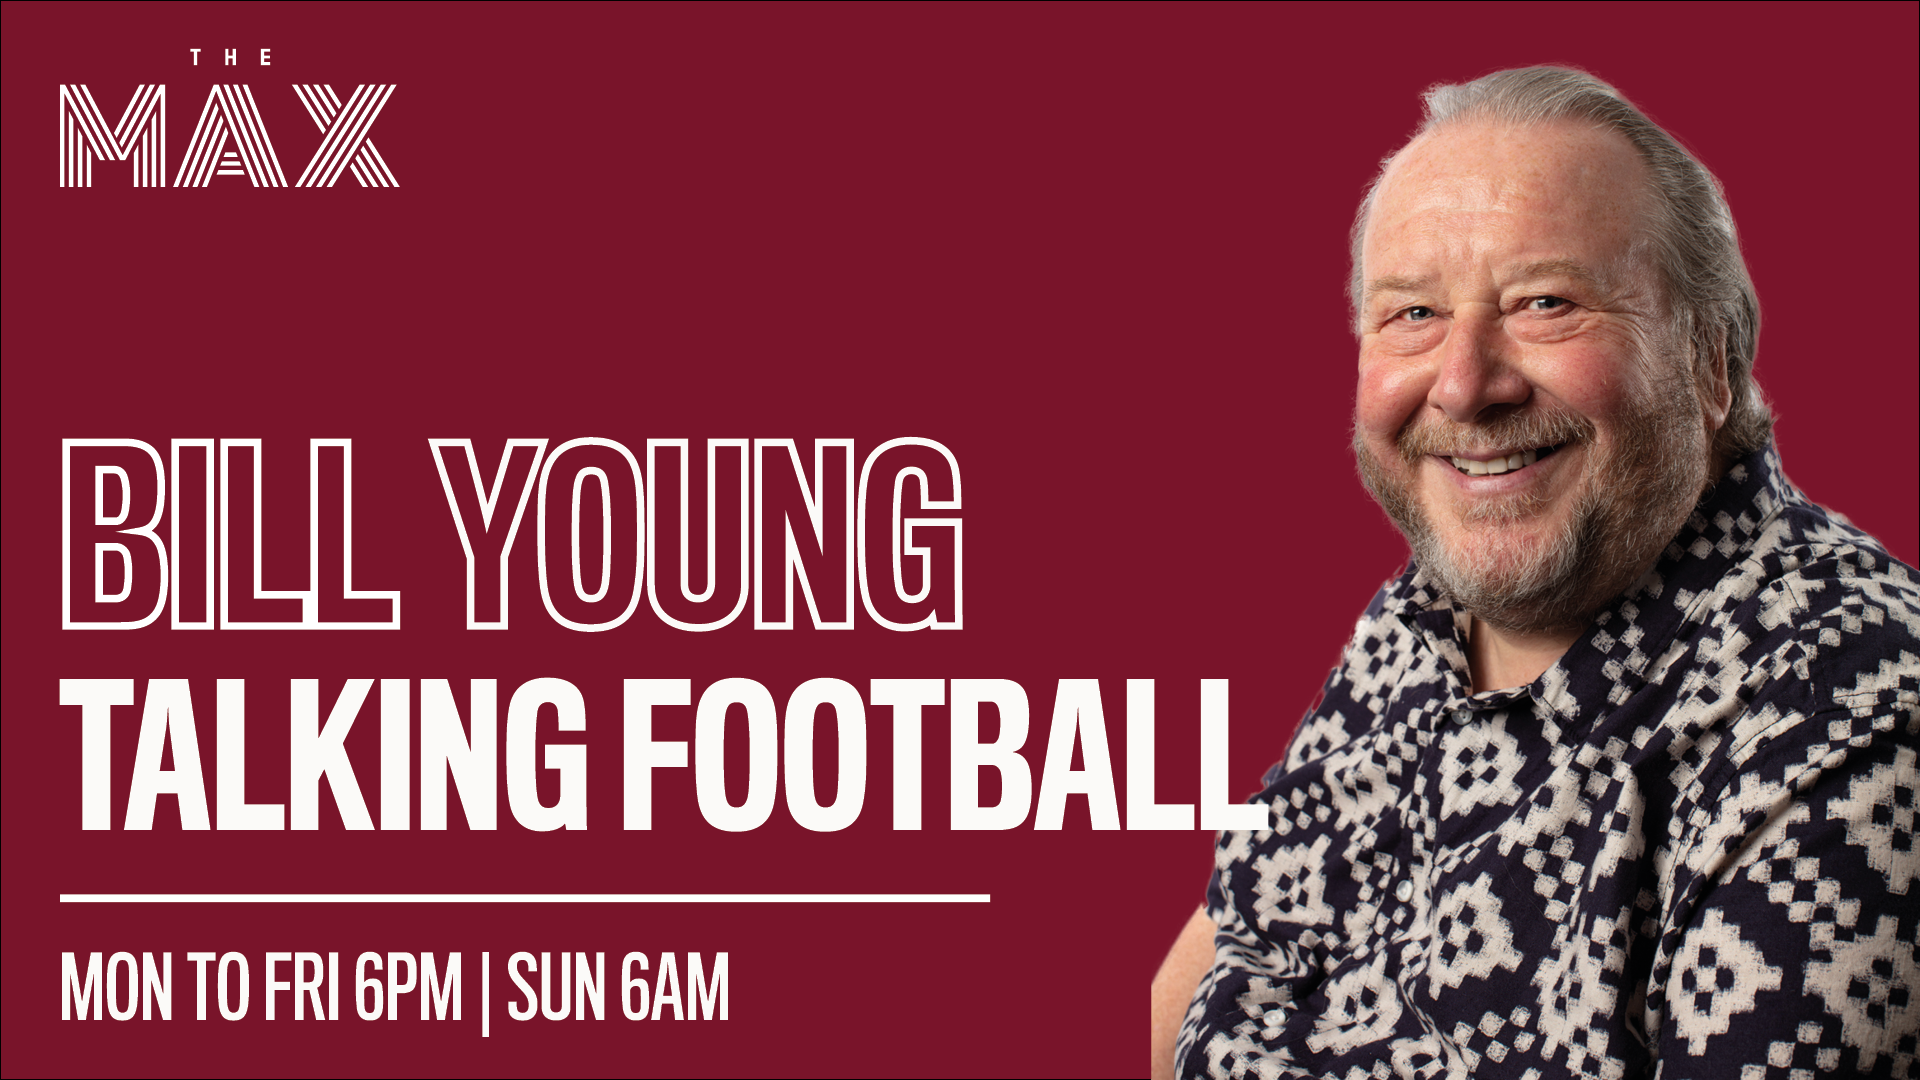 Talking Football with Bill Young - Tuesday 23 March